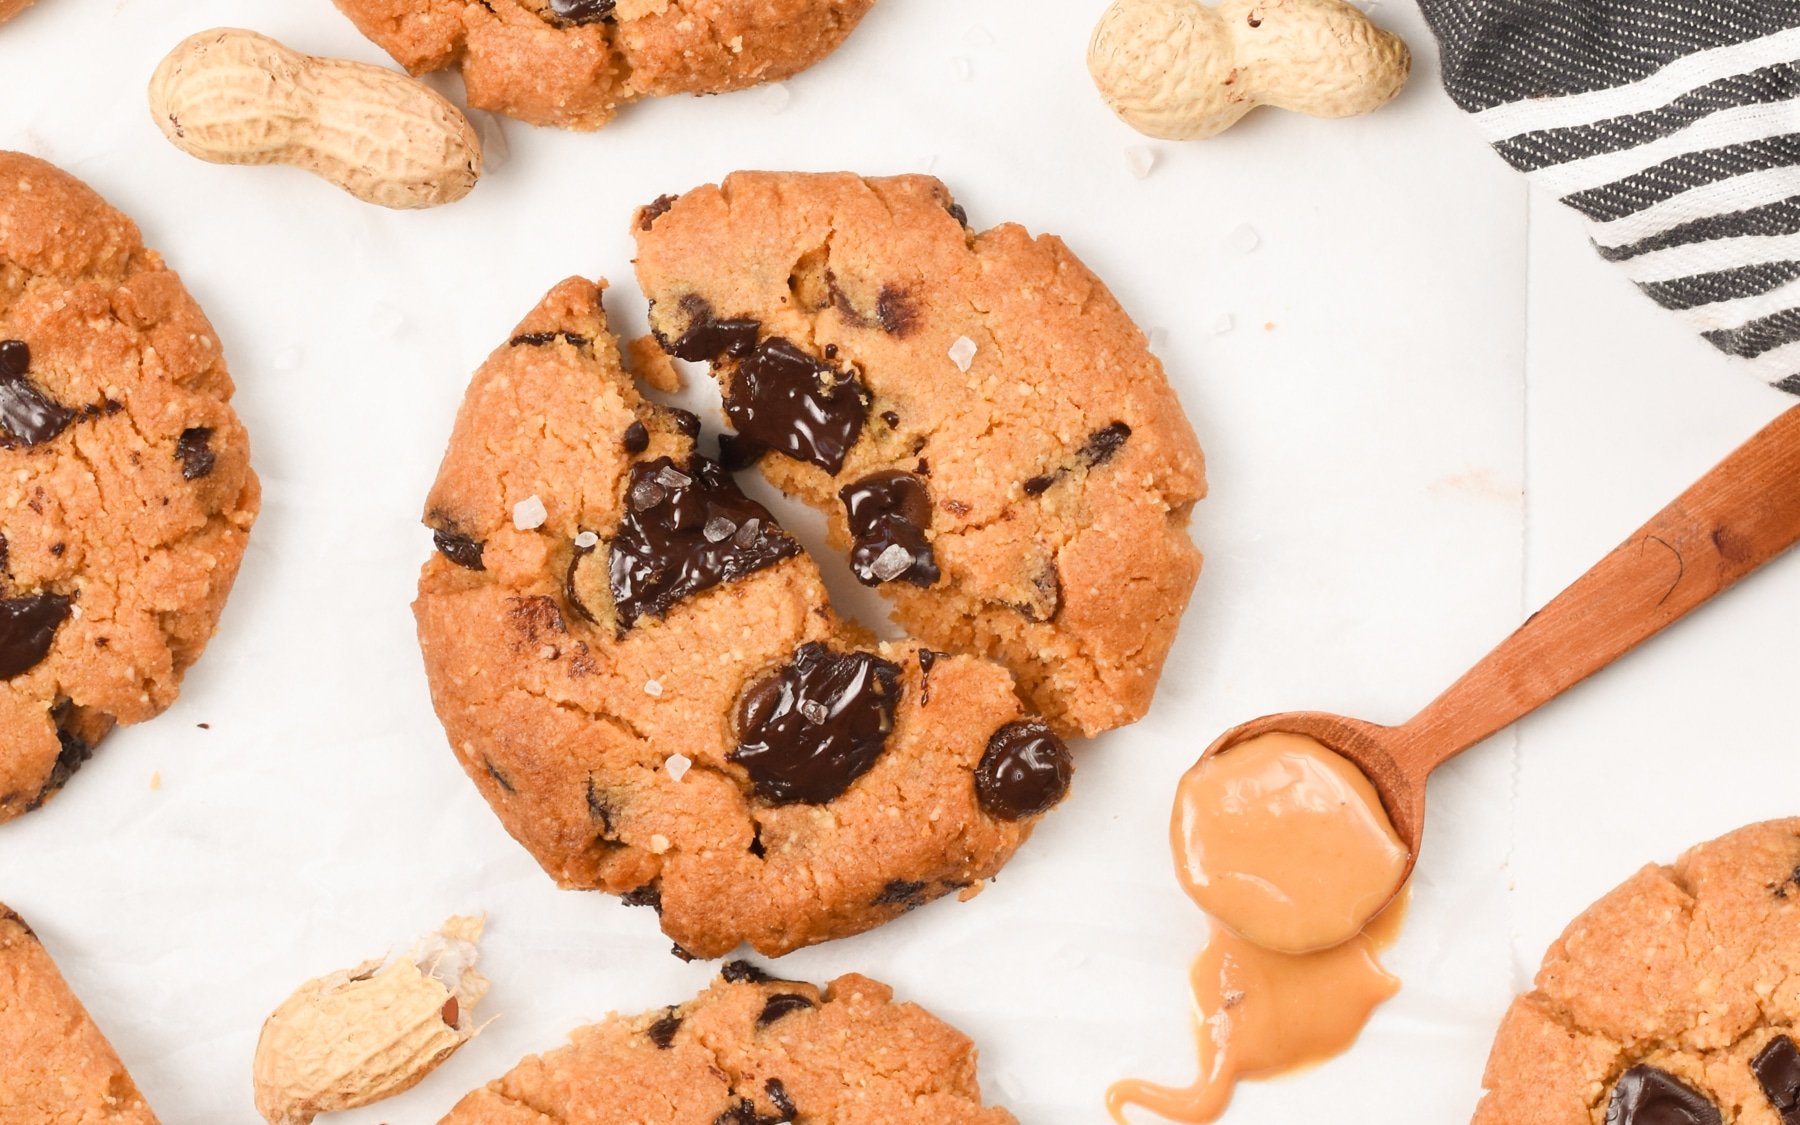 Low carb Peanut Butter Chocolate Chips Cookies